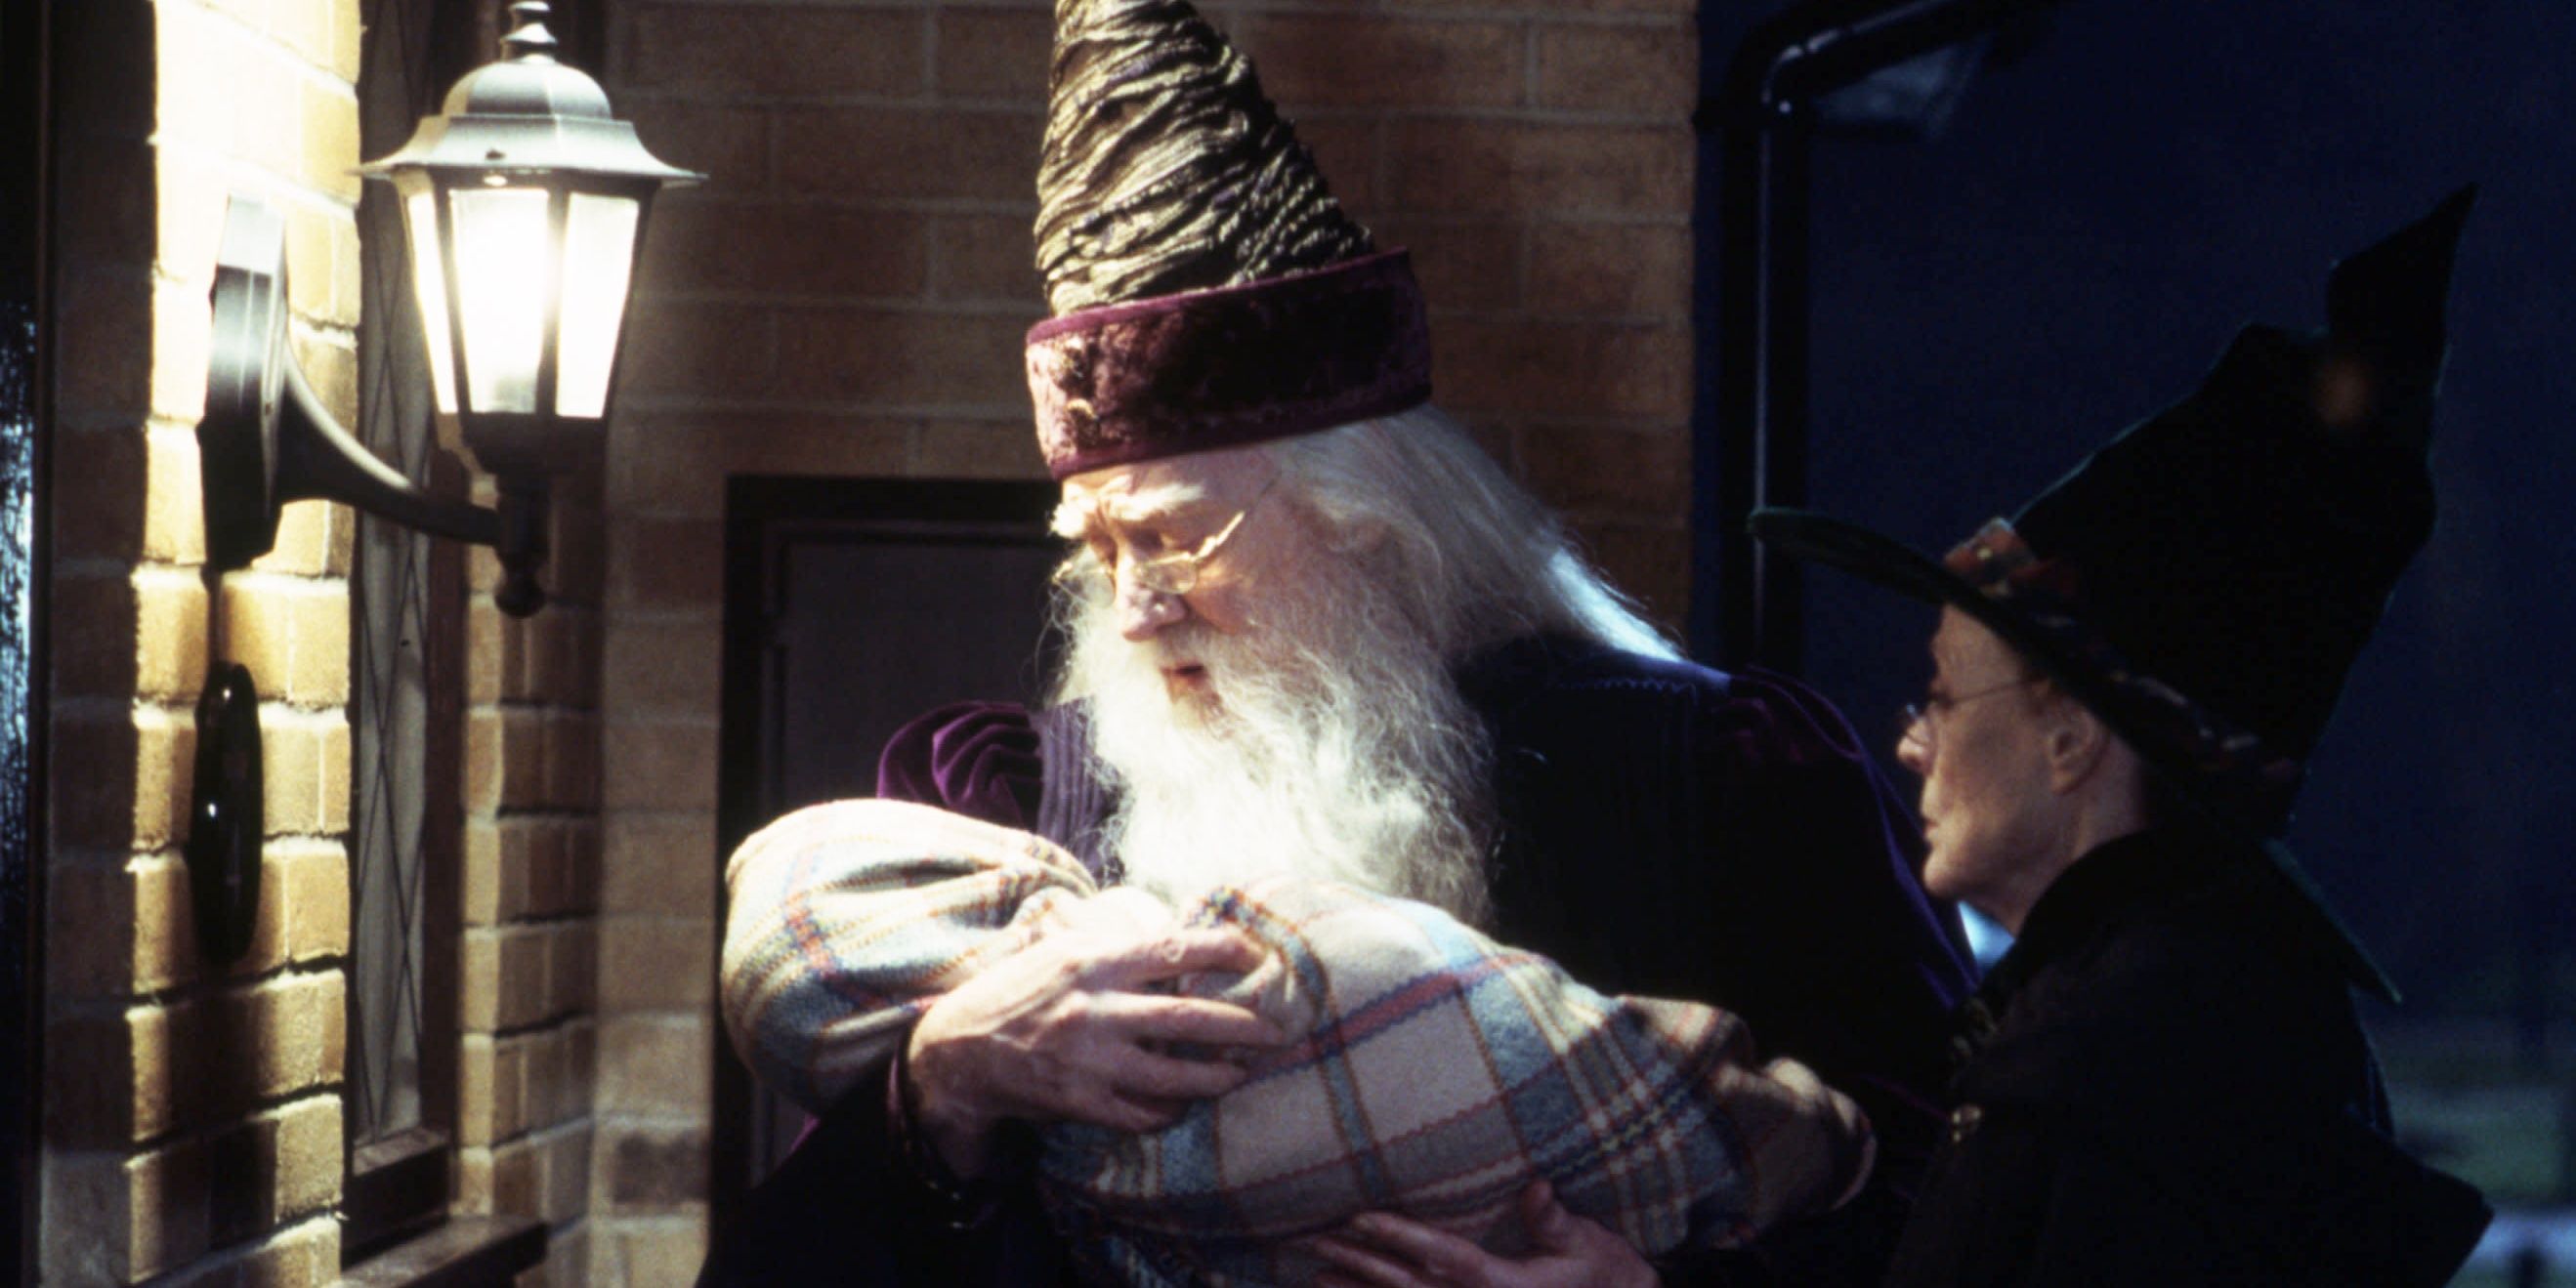 An image of Dumbledore and McGonagall looking at a baby Harry Potter